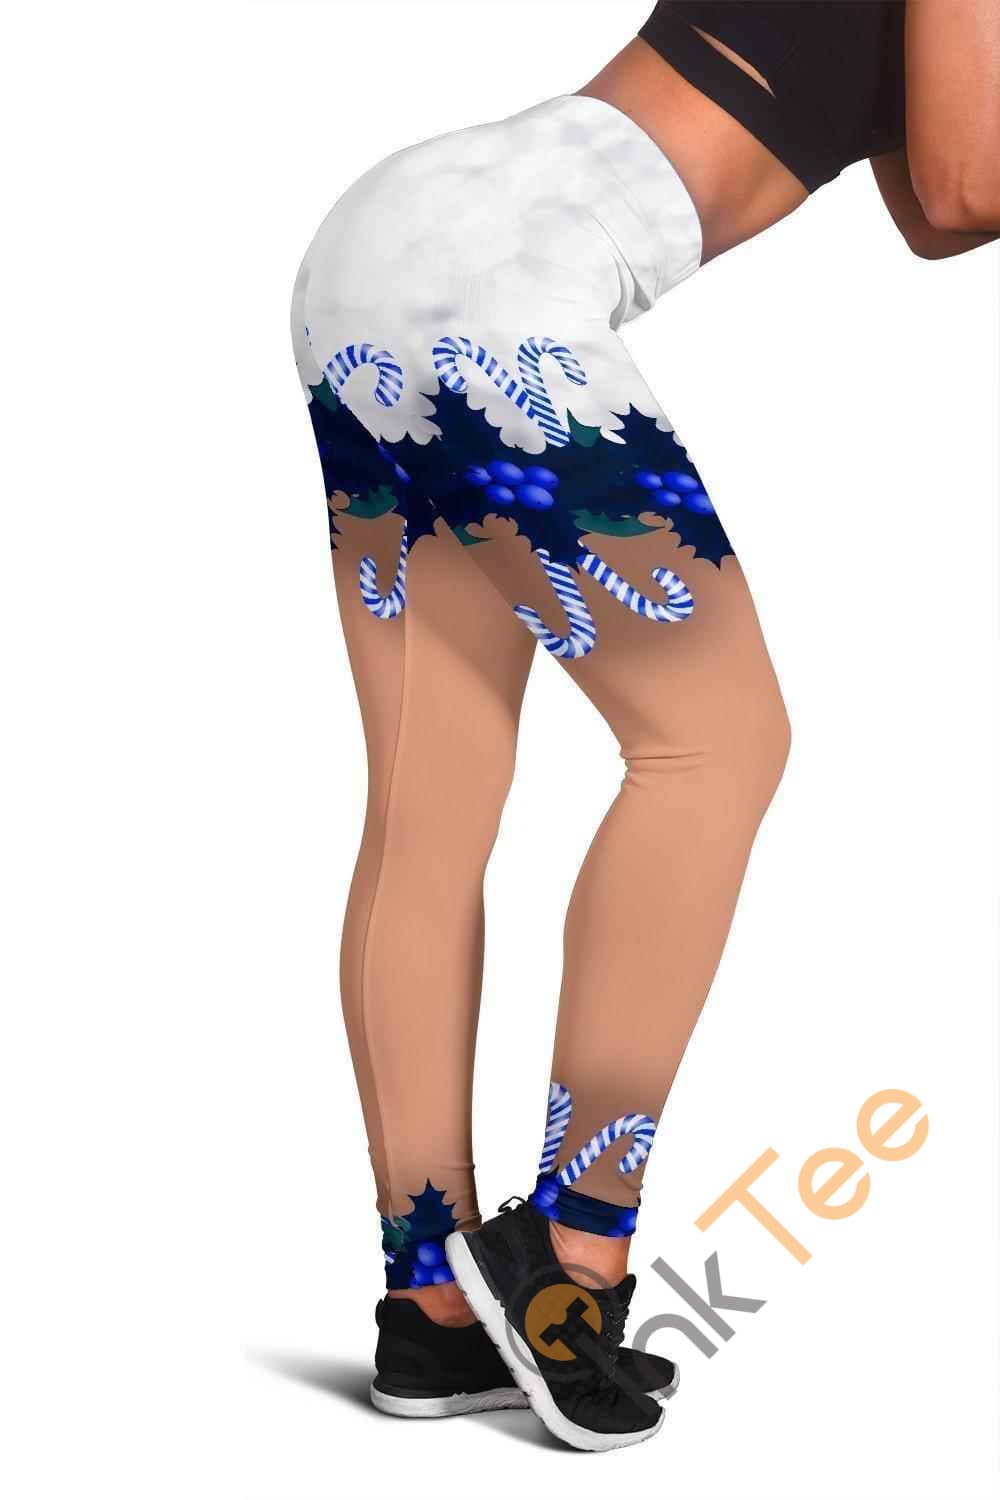 Inktee Store - Dallas Cowboys 3D All Over Print For Yoga Fitness Women'S Leggings Image